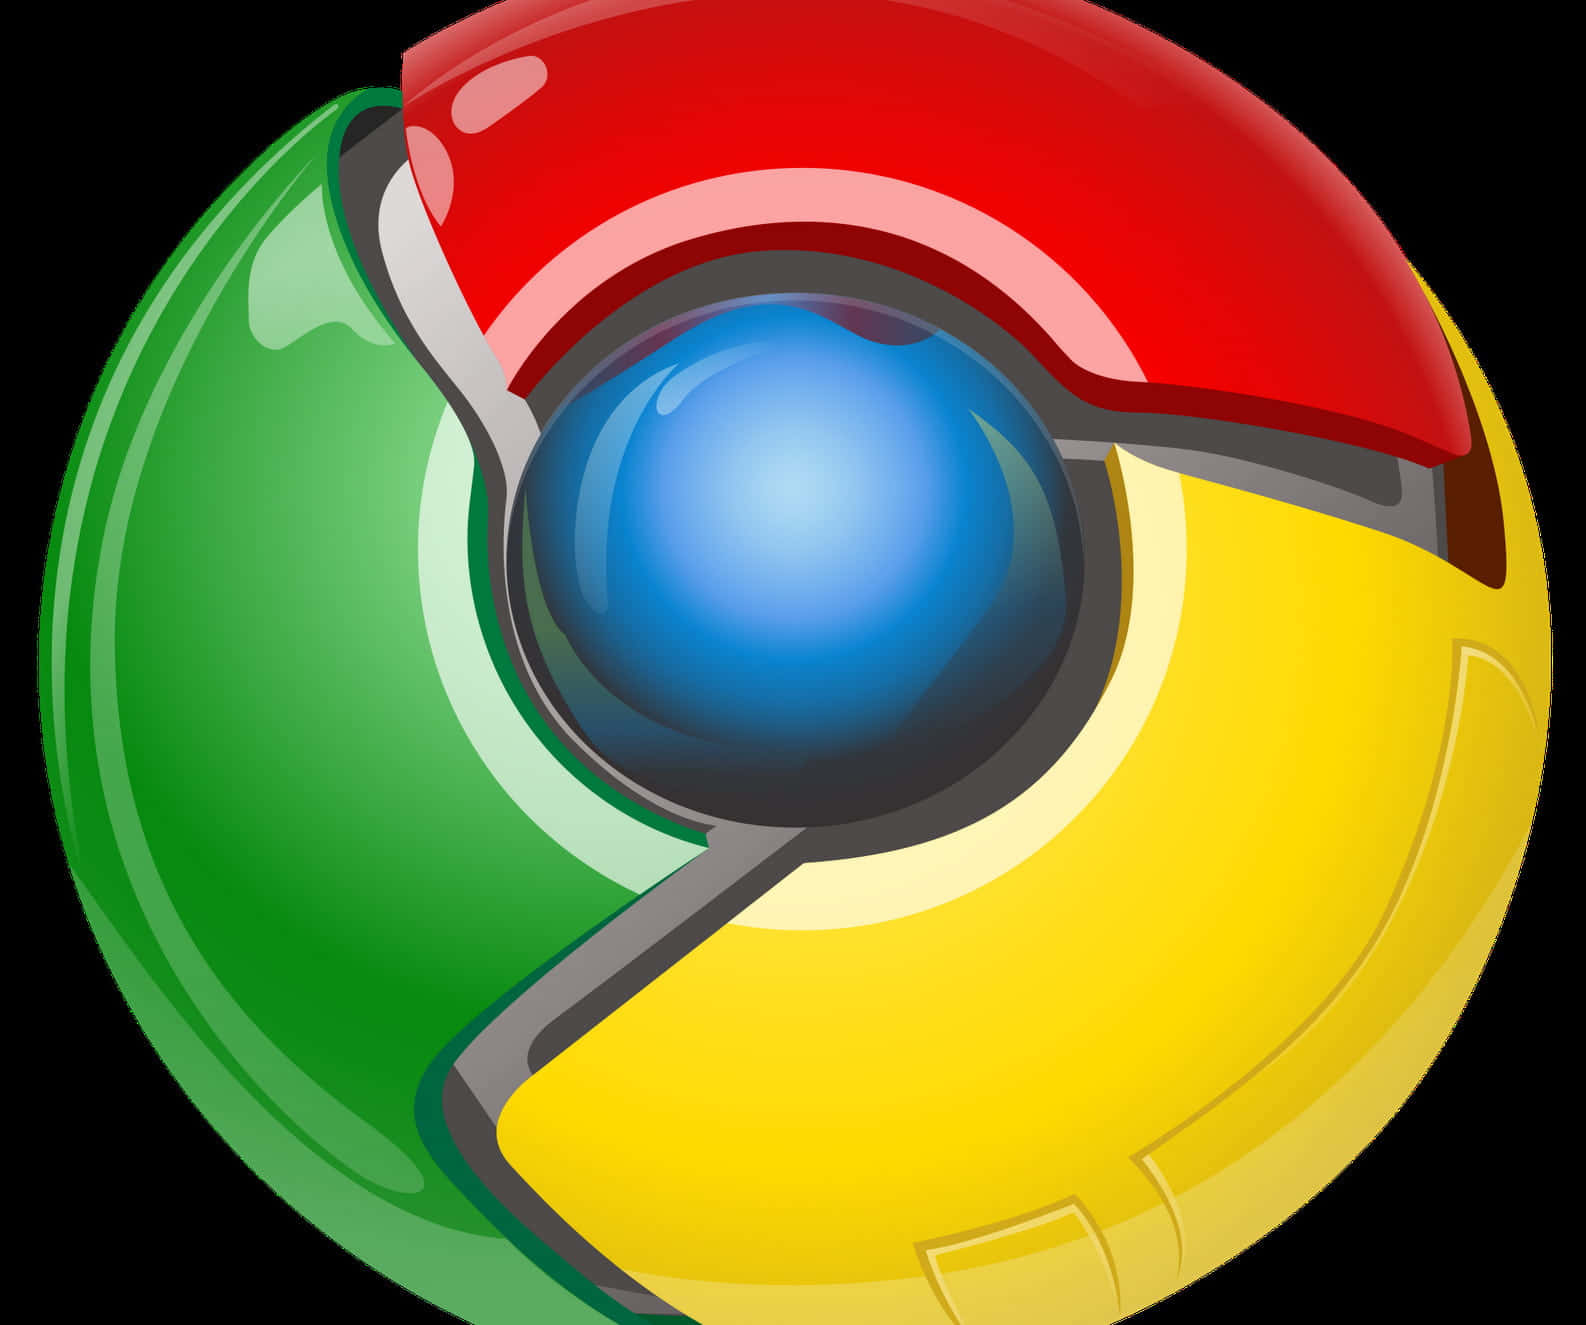 Enjoy Browsing with Google Chrome - The Leading Web Browser